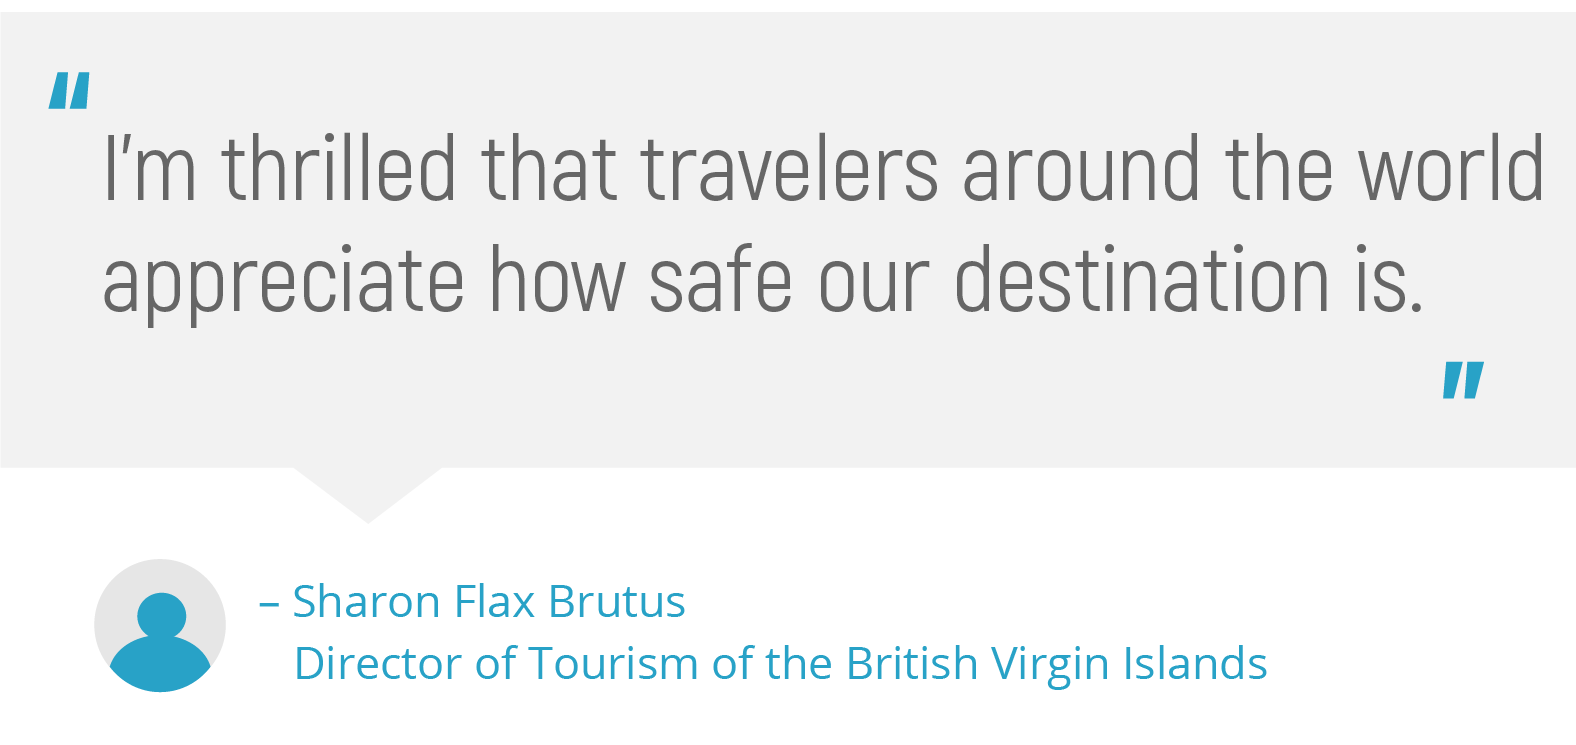 "I'm thrilled that travelers around the world appreciate how safe our destination is."